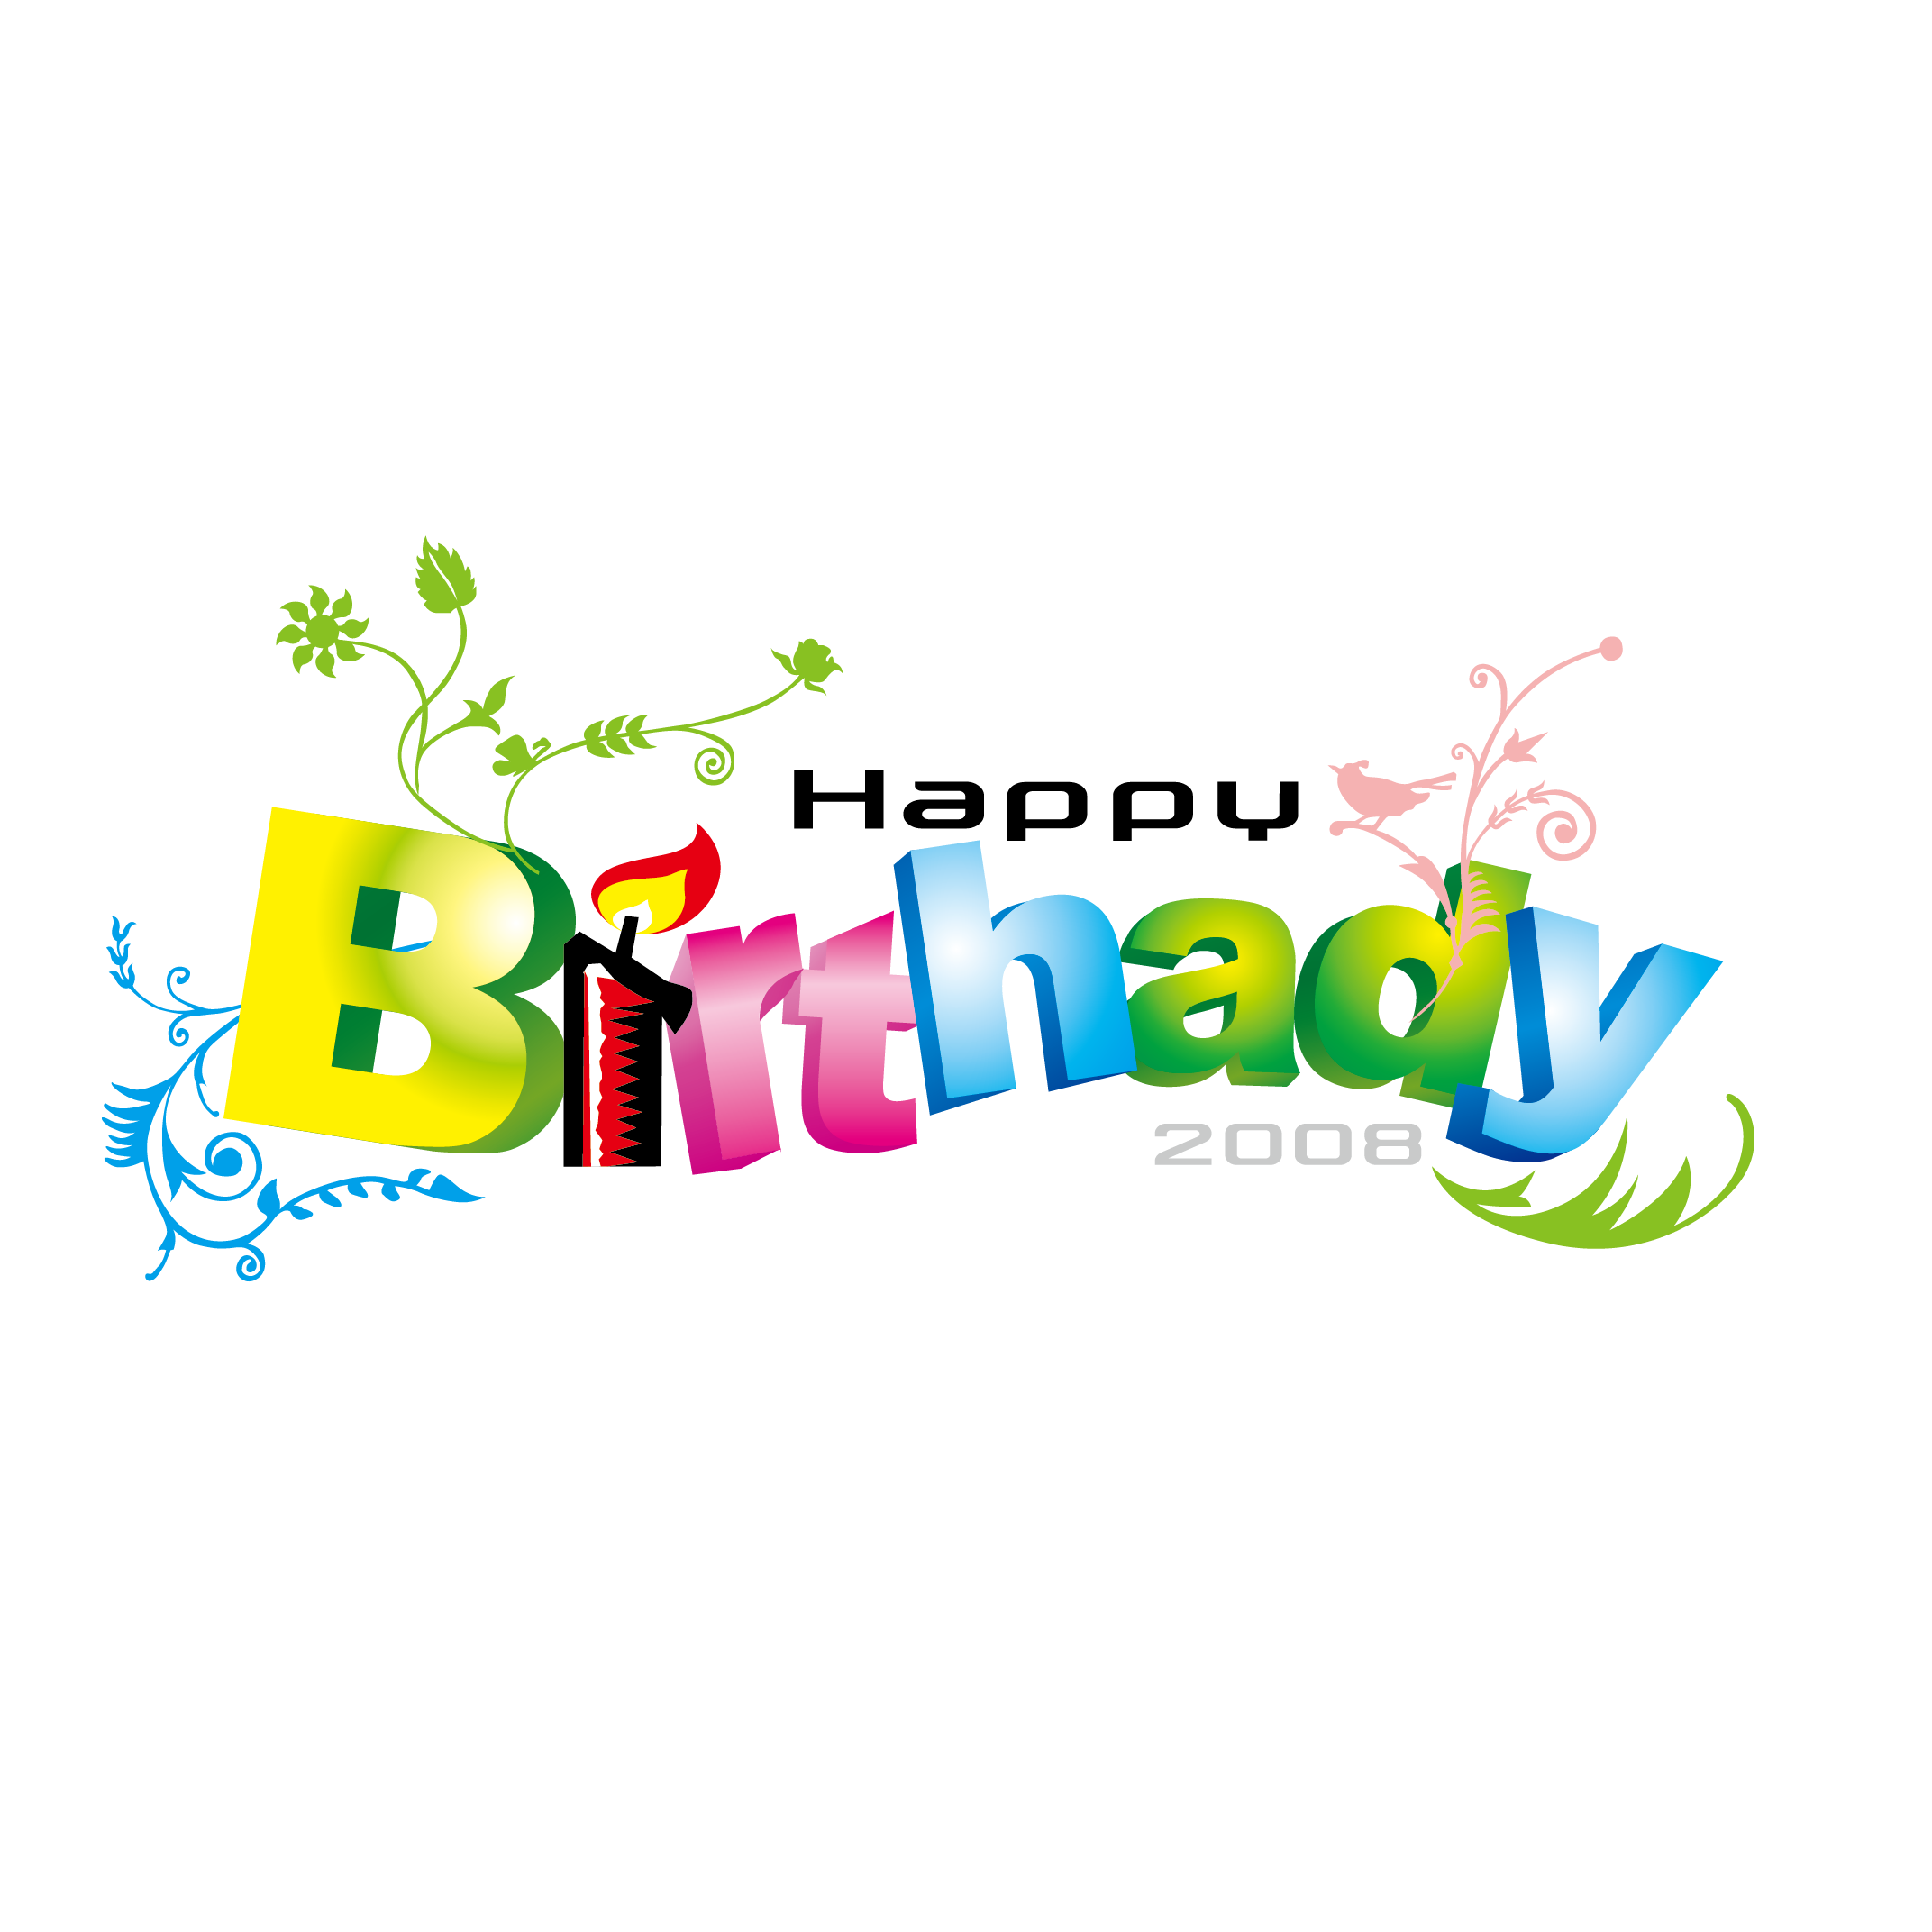 Happy Birthday To You Font English Color Word Art Vector Happy Birthday Png Download 2144 2144 Free Transparent Birthday Cake Png Download Clip Art Library